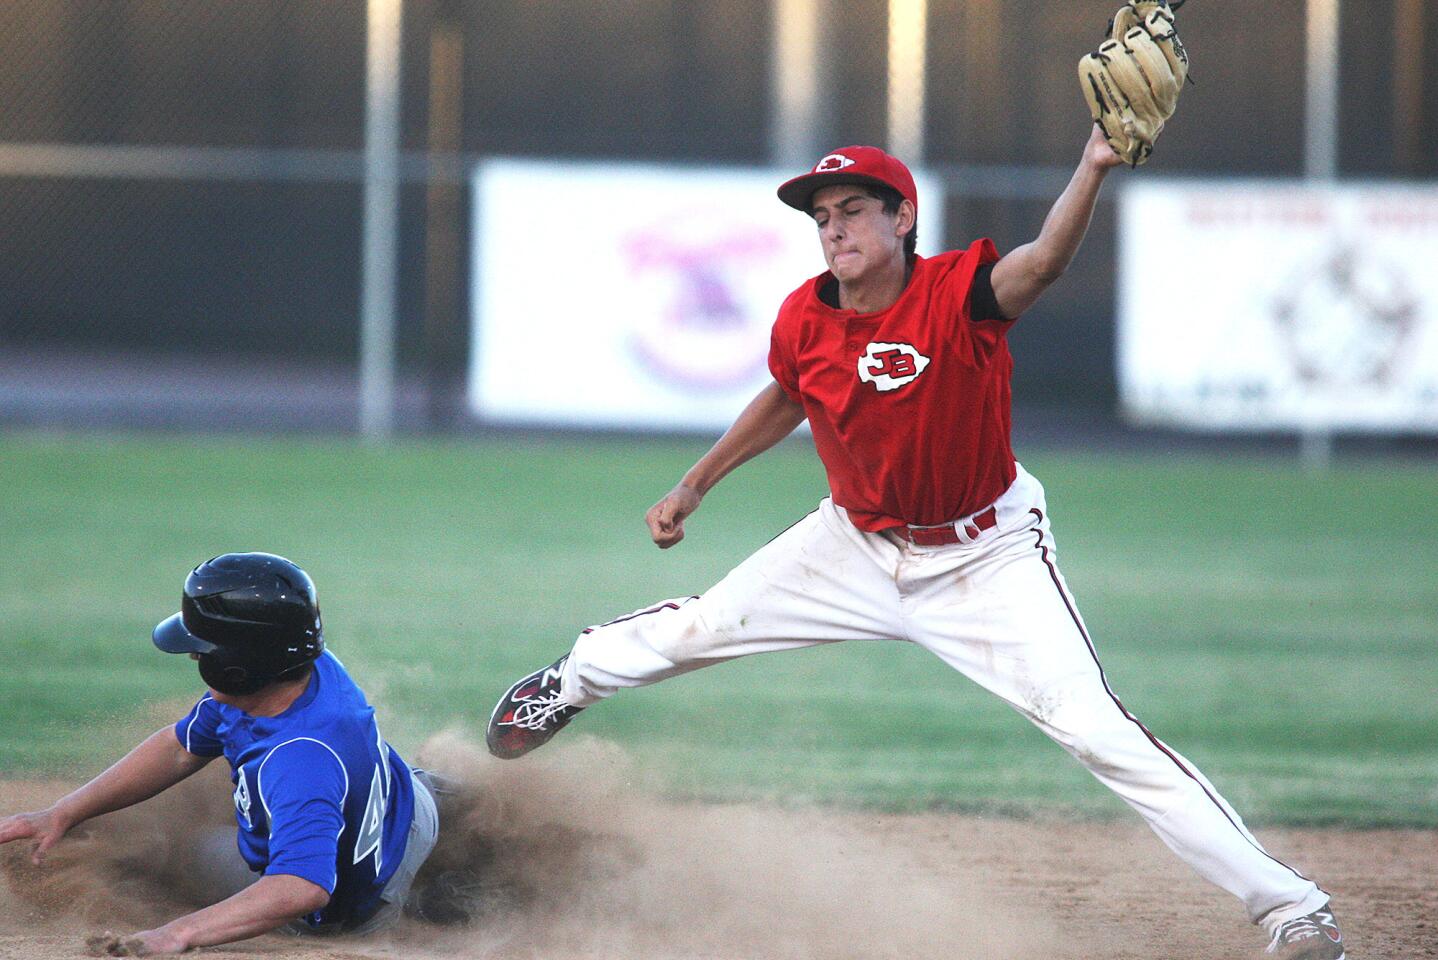 Burroughs' Ryan Galen stretches to catch the ball at second base on the steal by Burbank's Ryan Porras in a VIBL baseball playoff game at Burroughs High School in Burbank on Thursday, July 17, 2014. (Tim Berger/Staff Photographer)